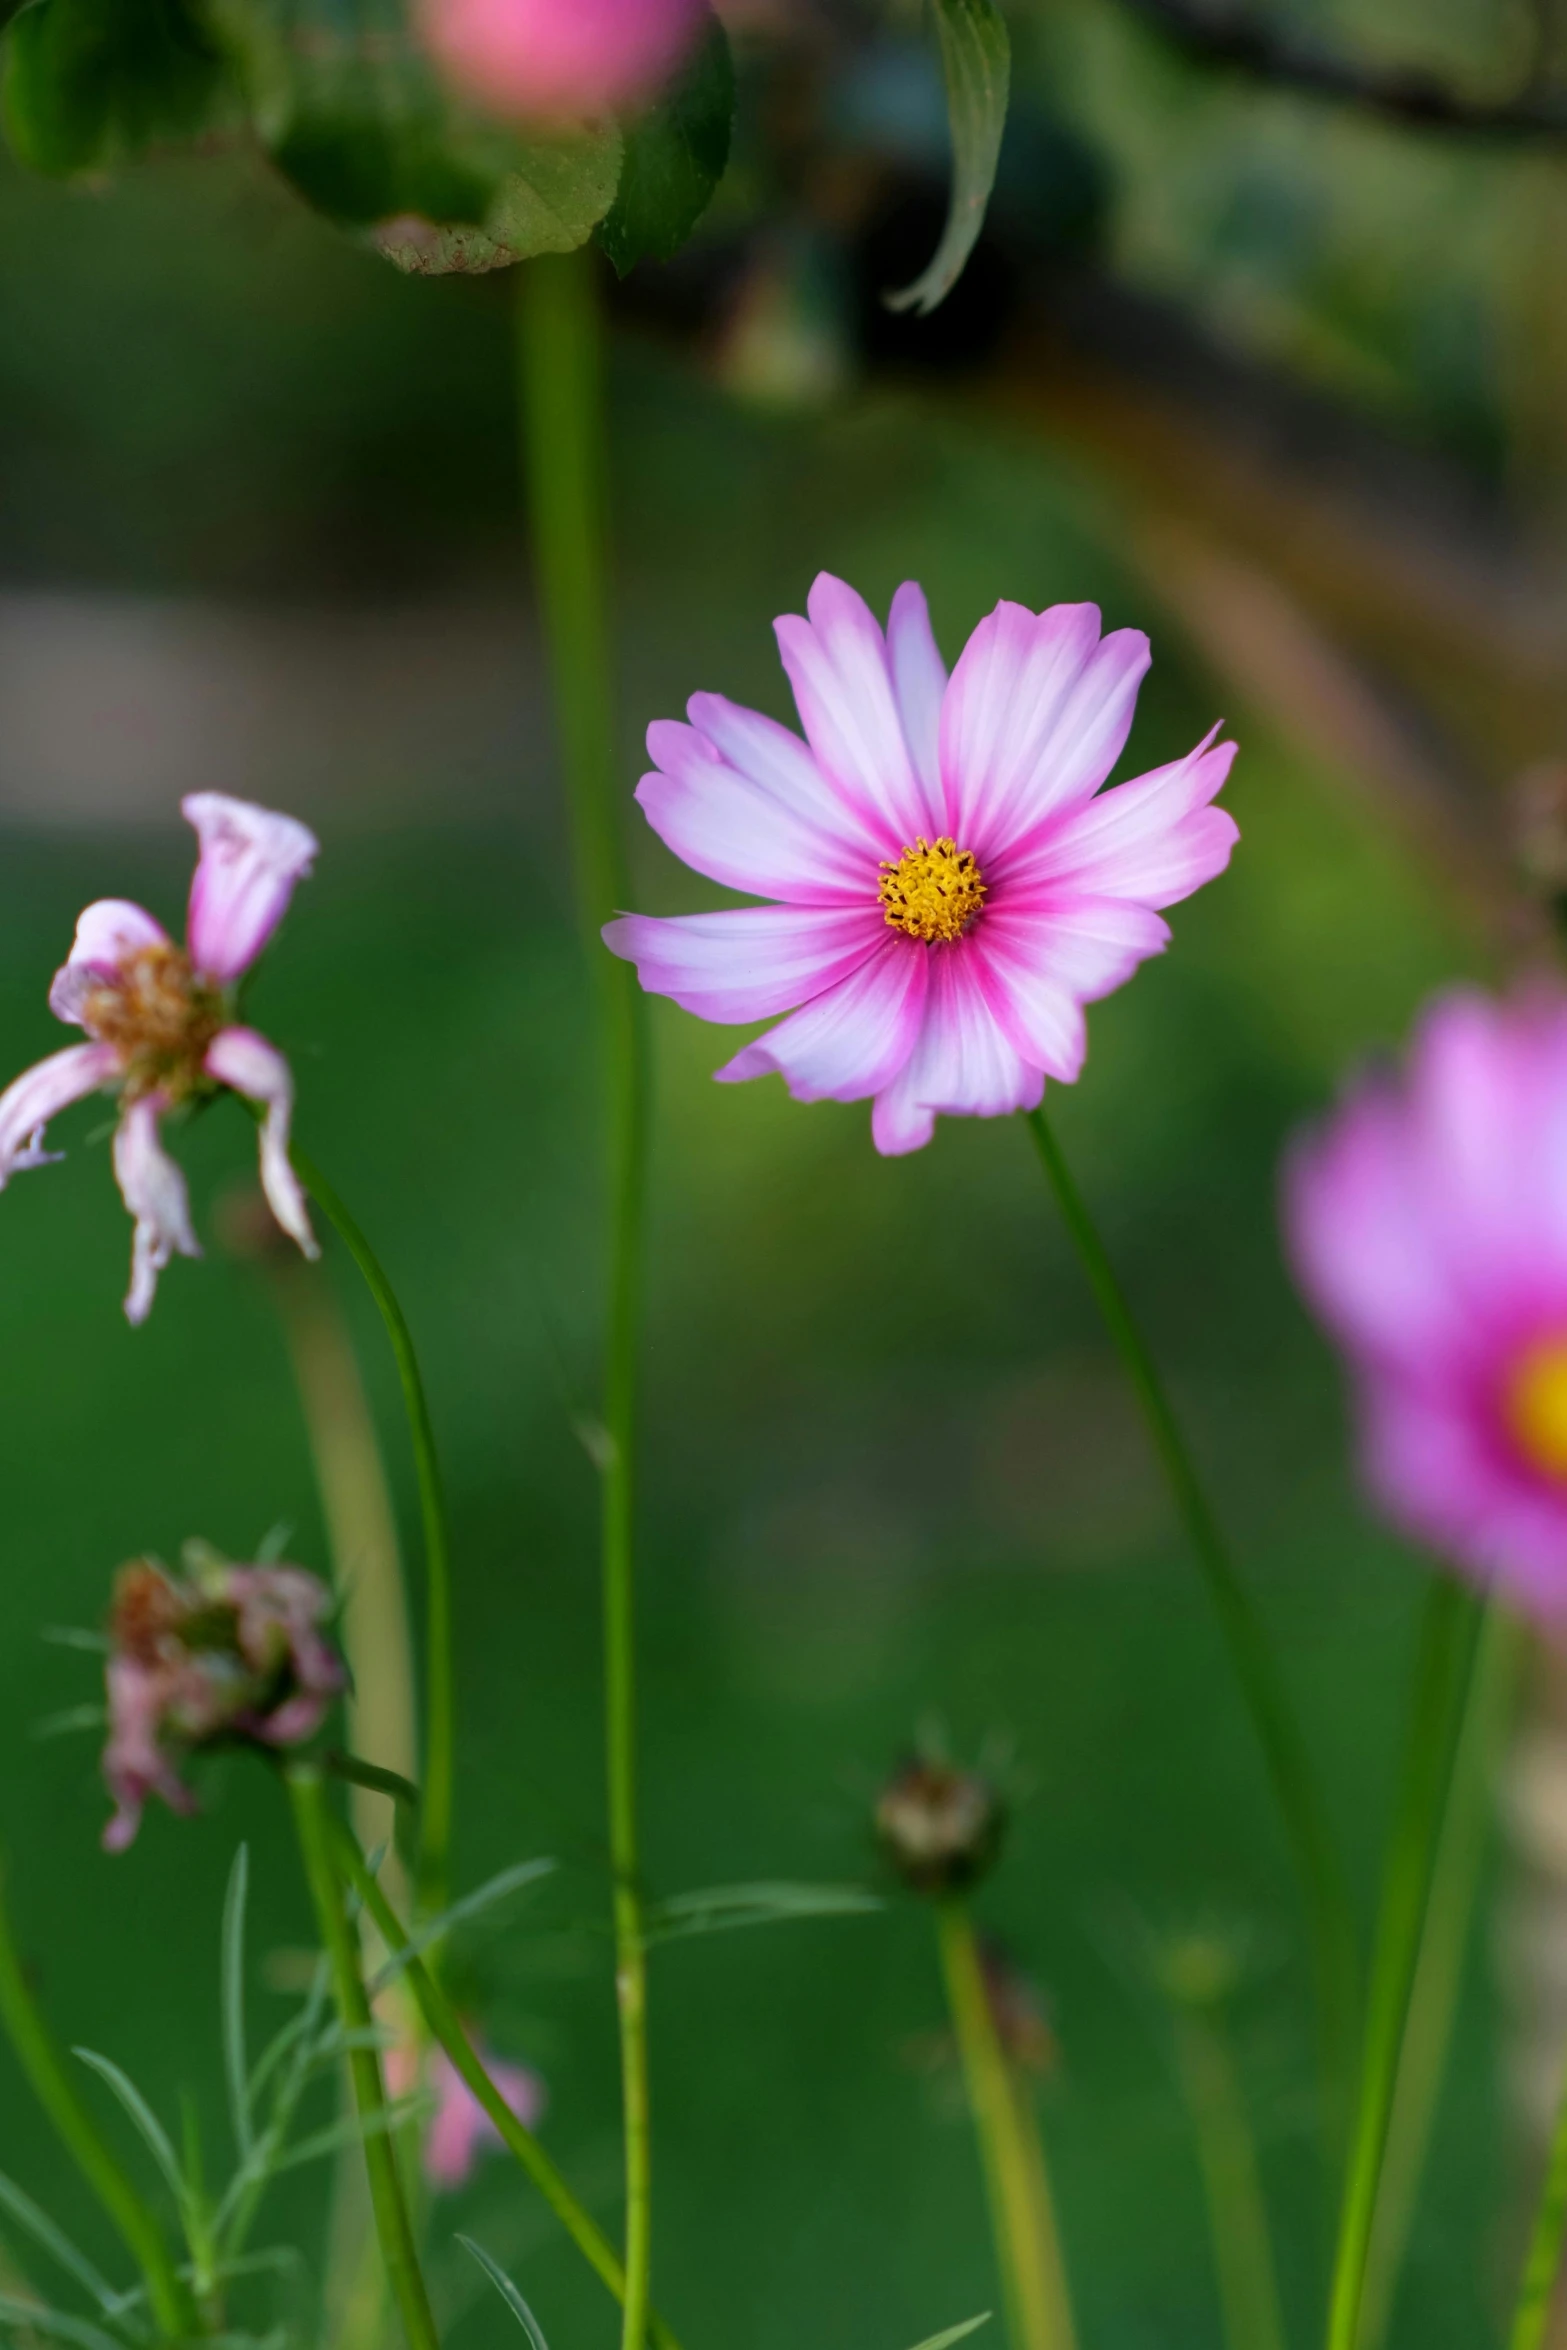 close up of a pink daisy flower with another flower in the background